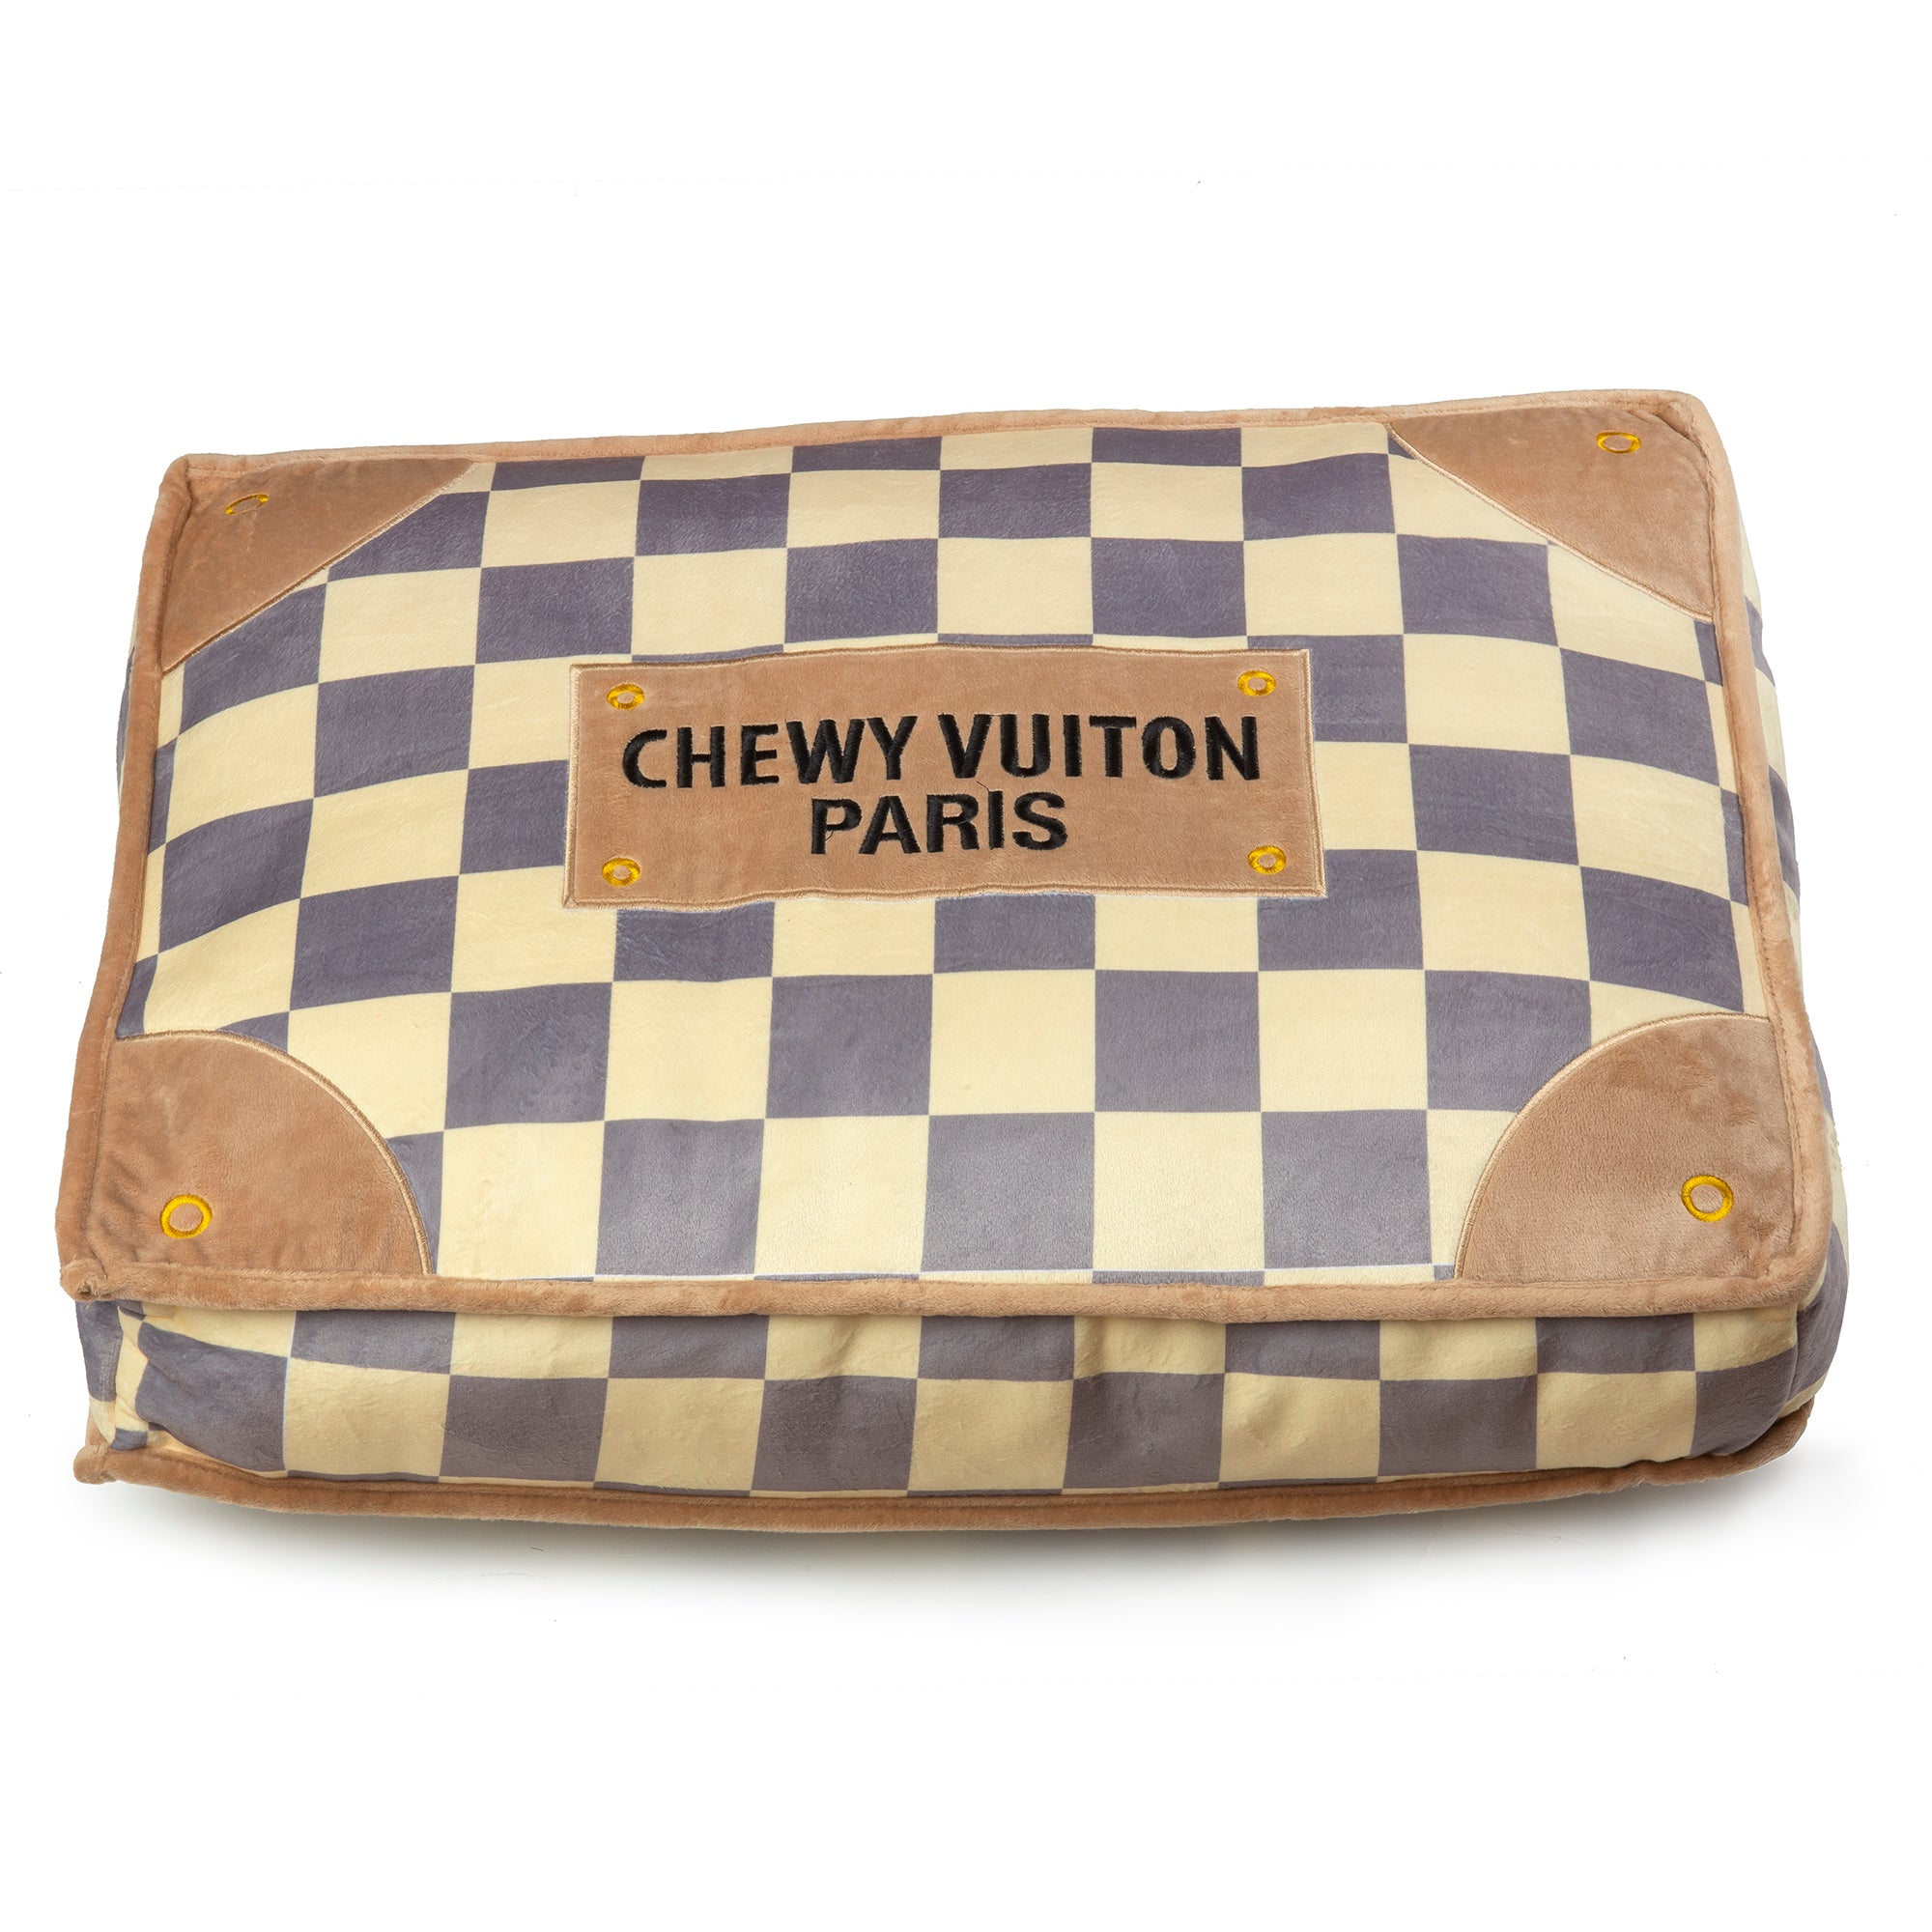 Pampered Pooch Perfection: Parody Chewy Vuiton Plush Dog Beds